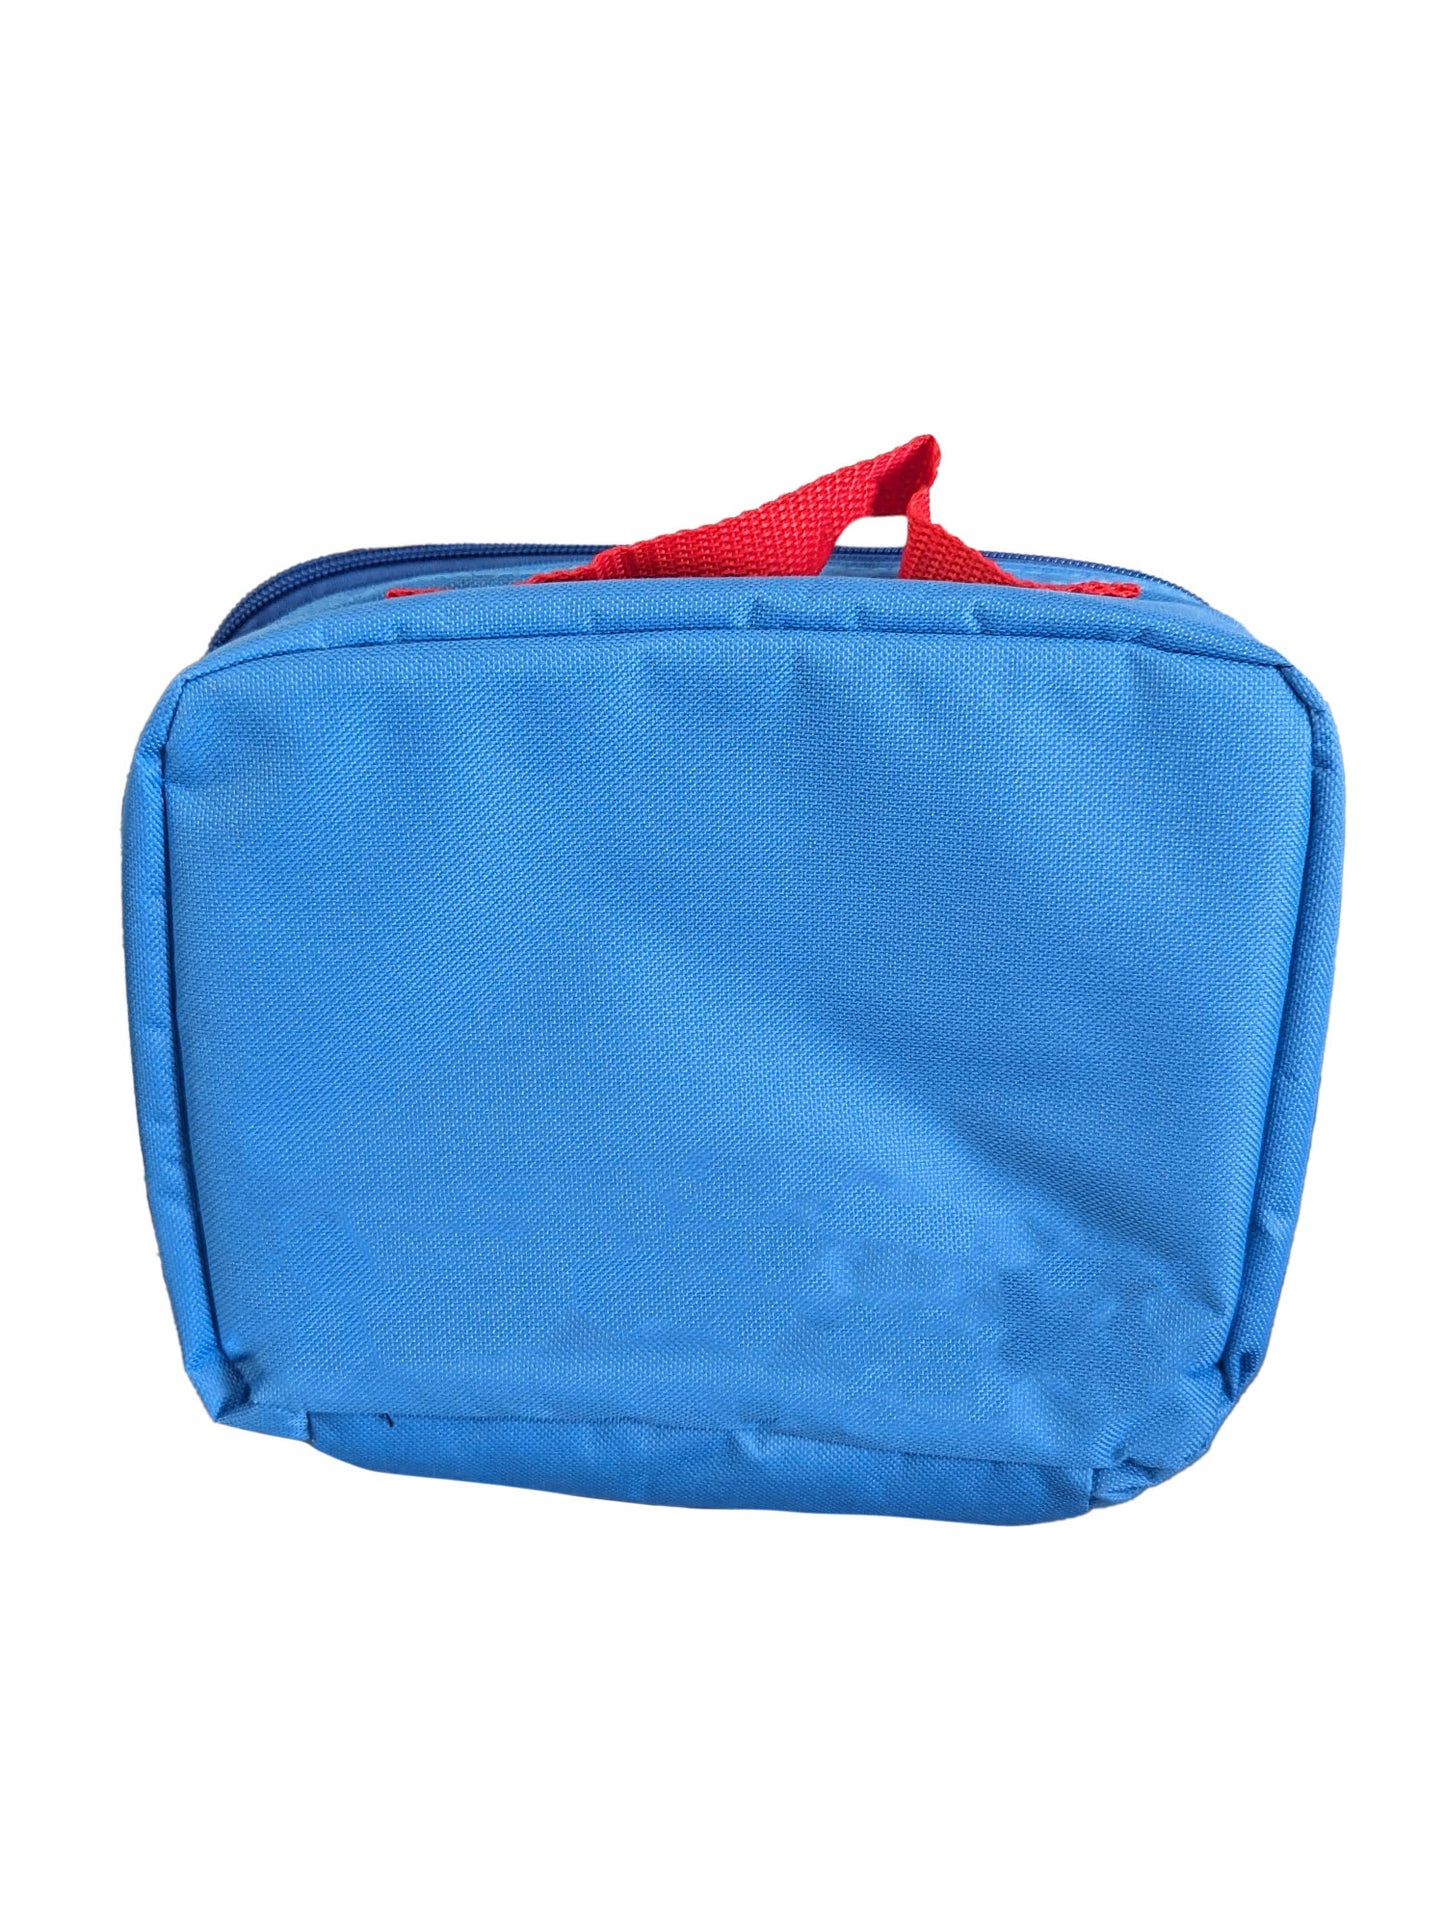 Team Sonic The Hedgehog & Knuckles Insulated Lunch Bag